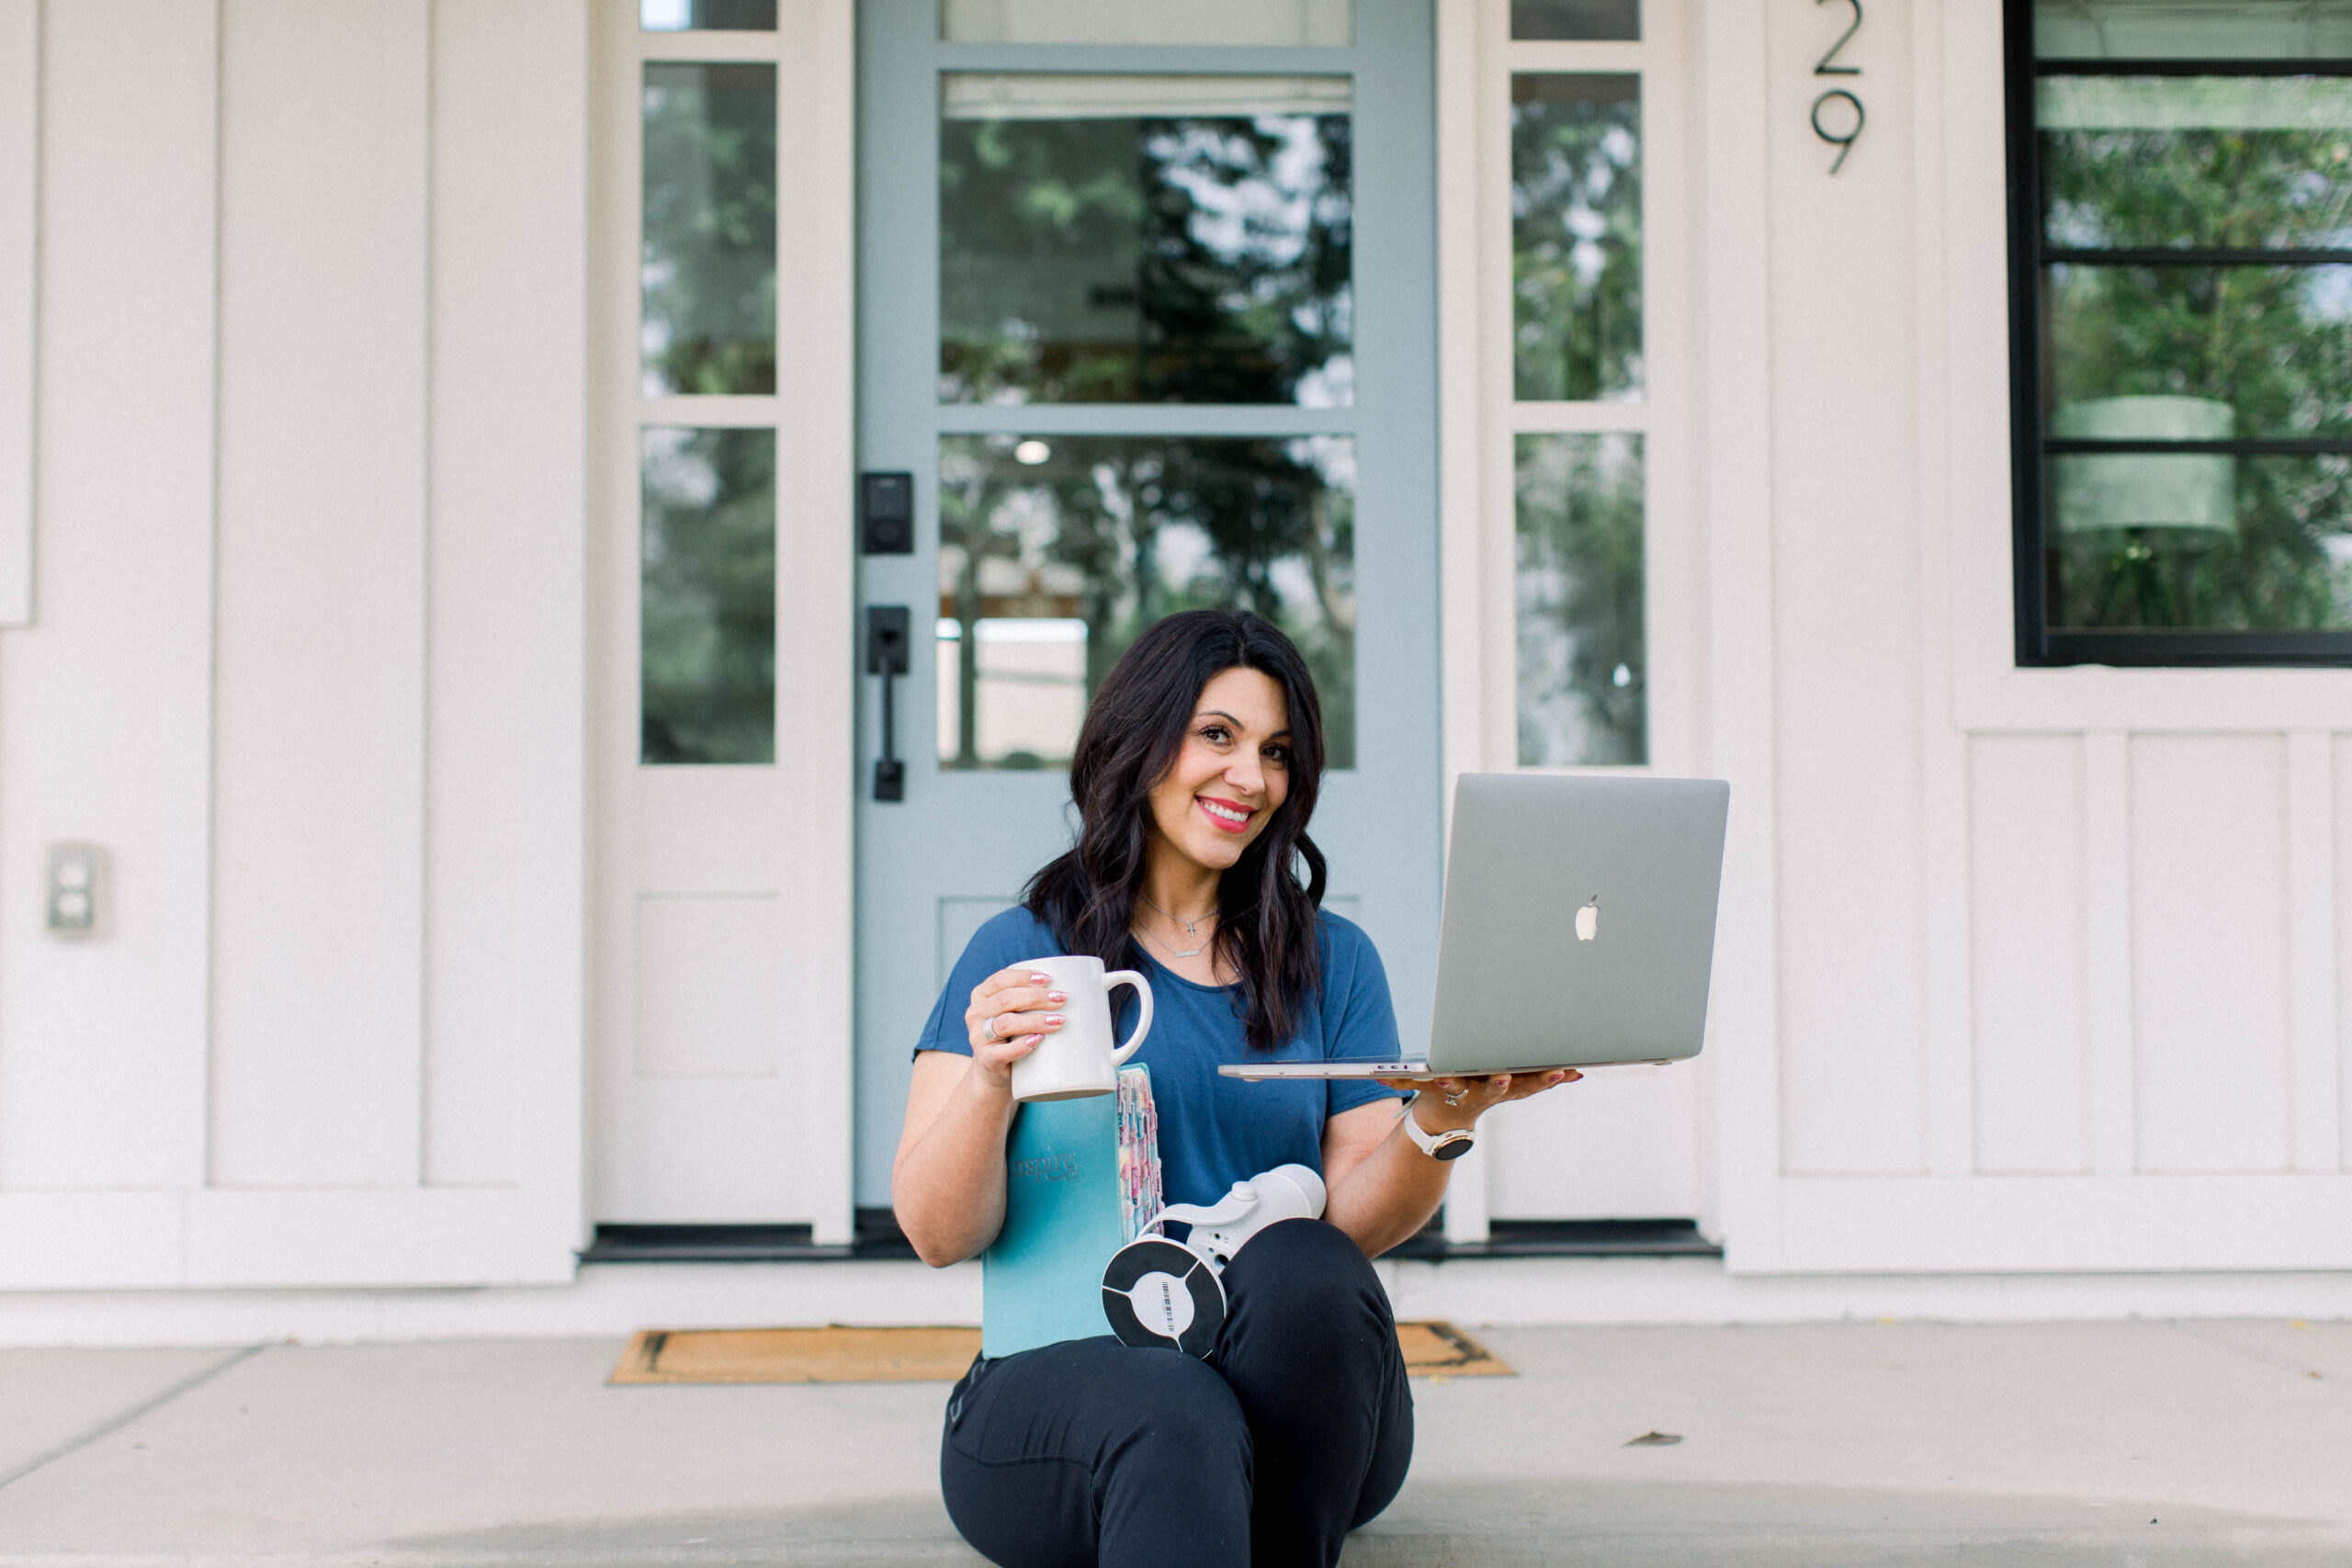 photo of a dark haired woman sitting on the steps in front of a house with her laptop, bible, coffee mug, and microphone in her lap.